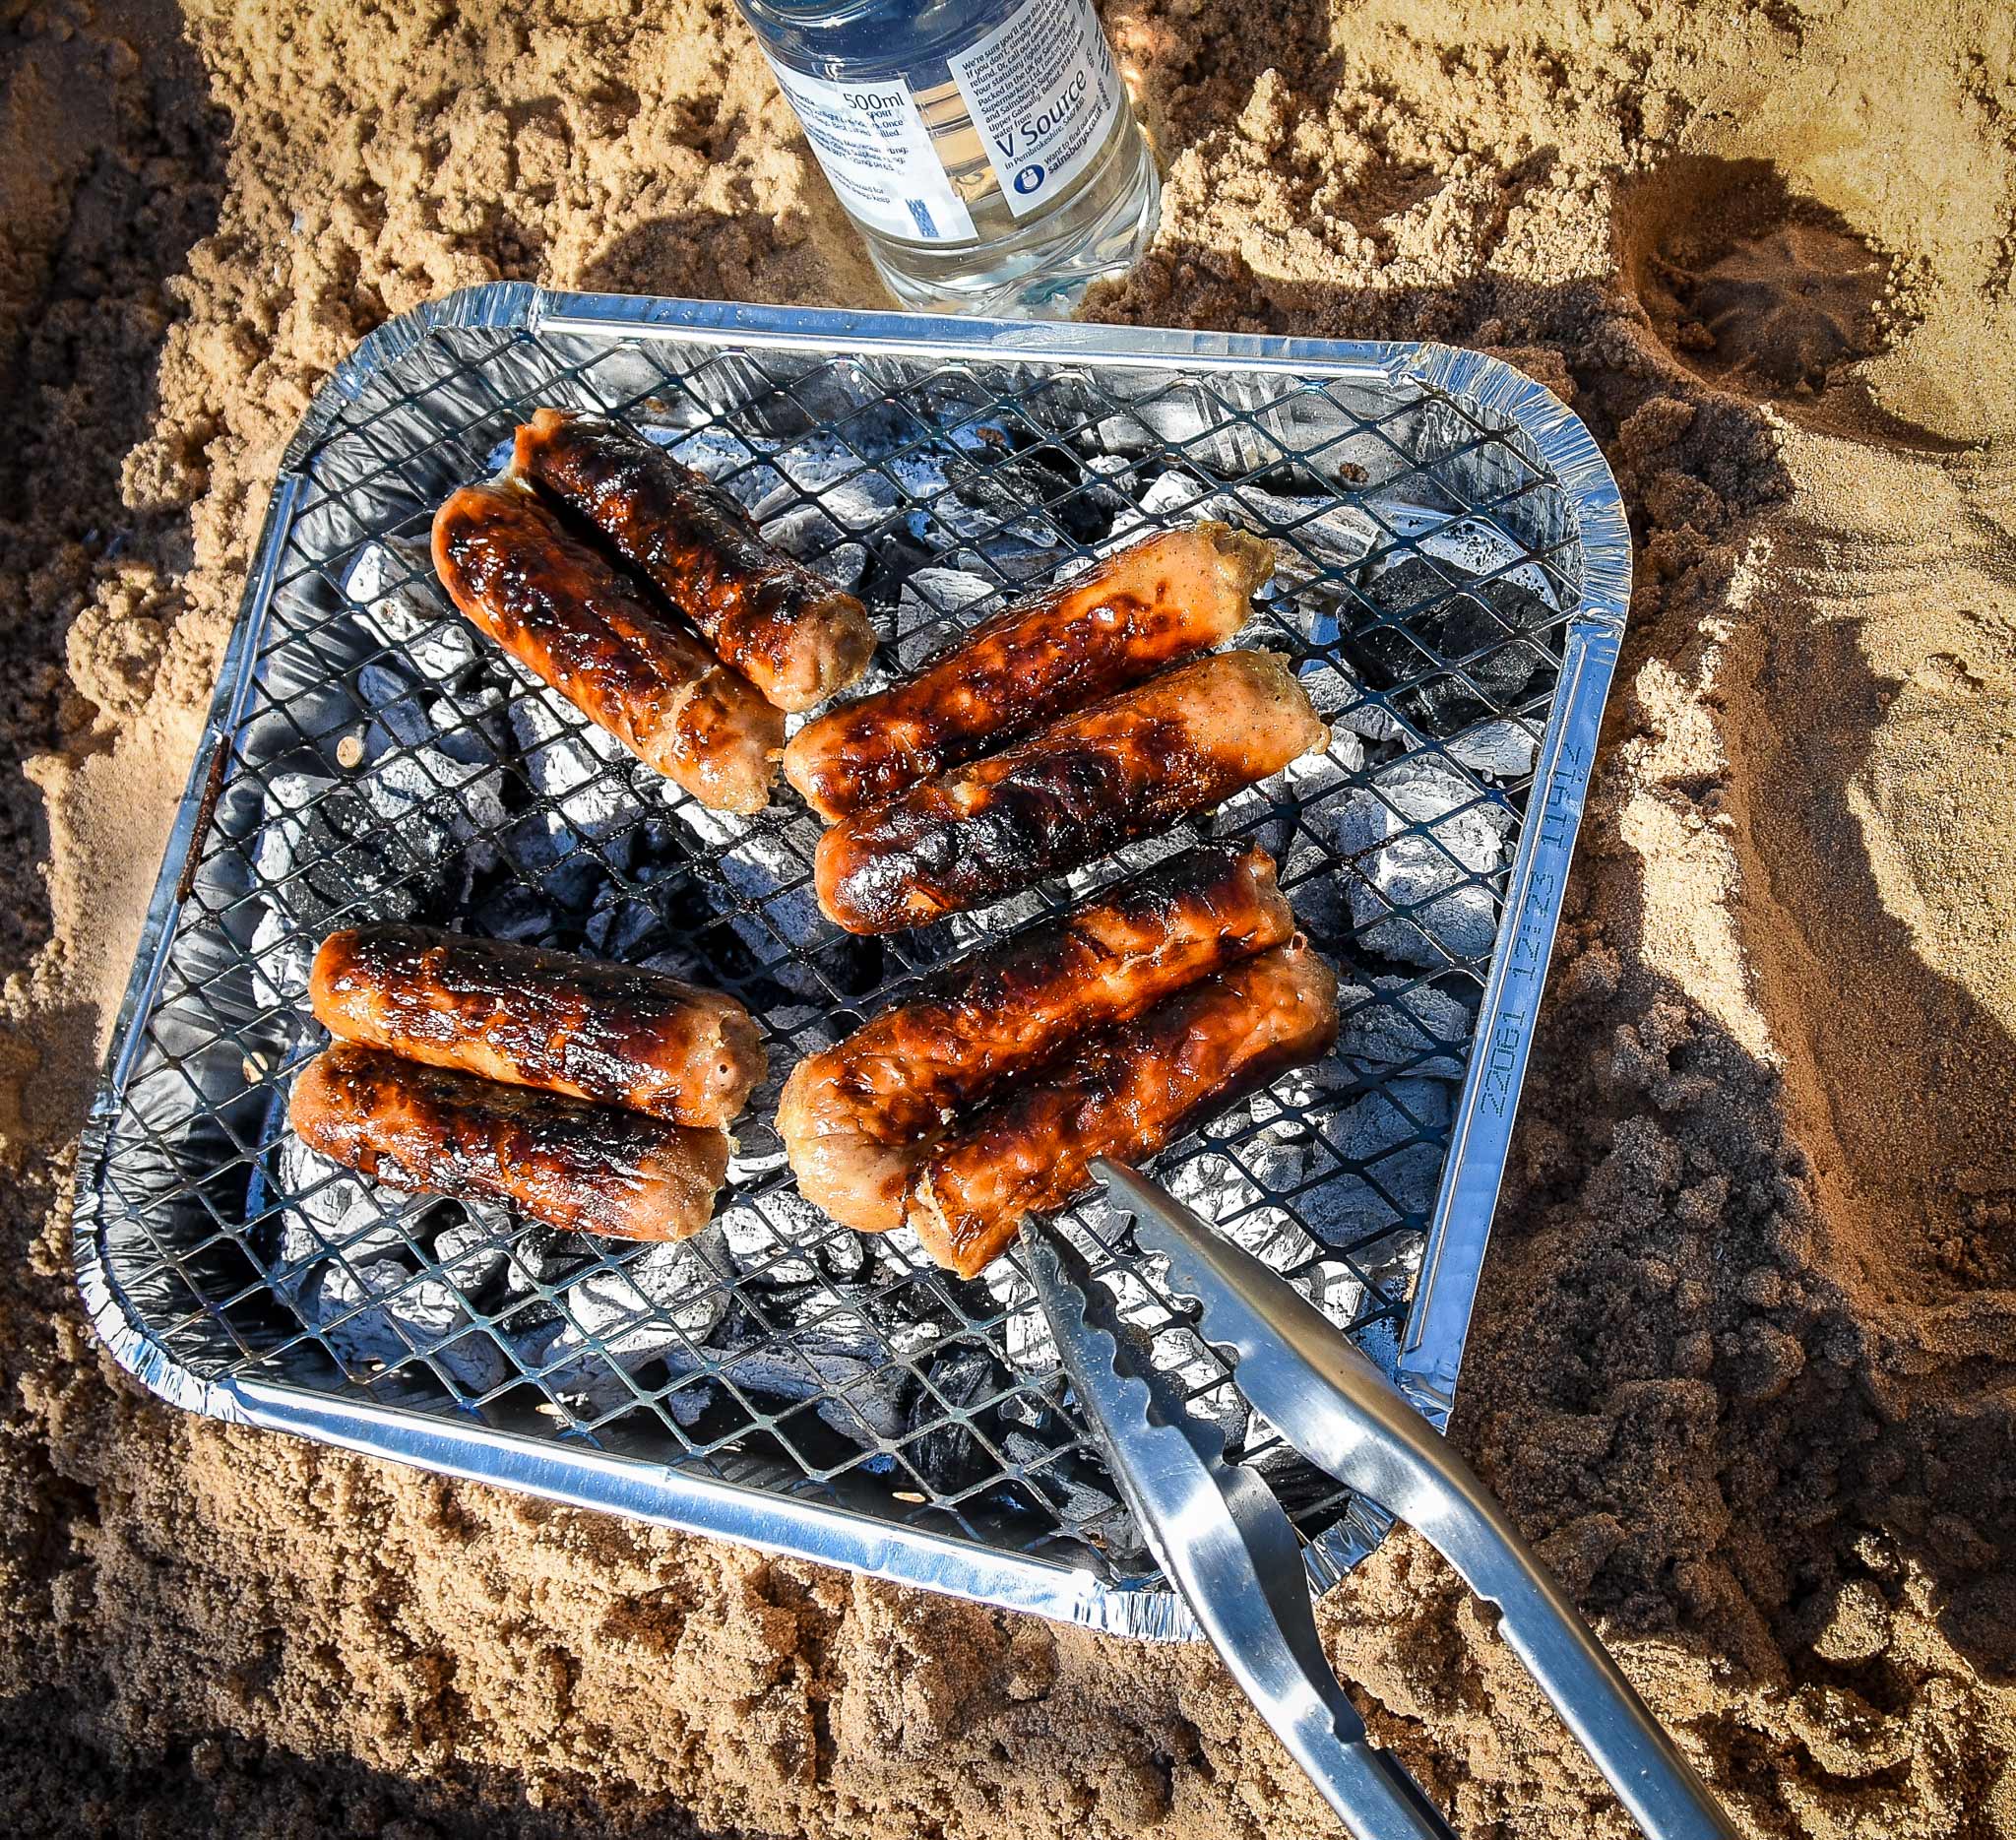 Are Barbecues safe to use on the beach